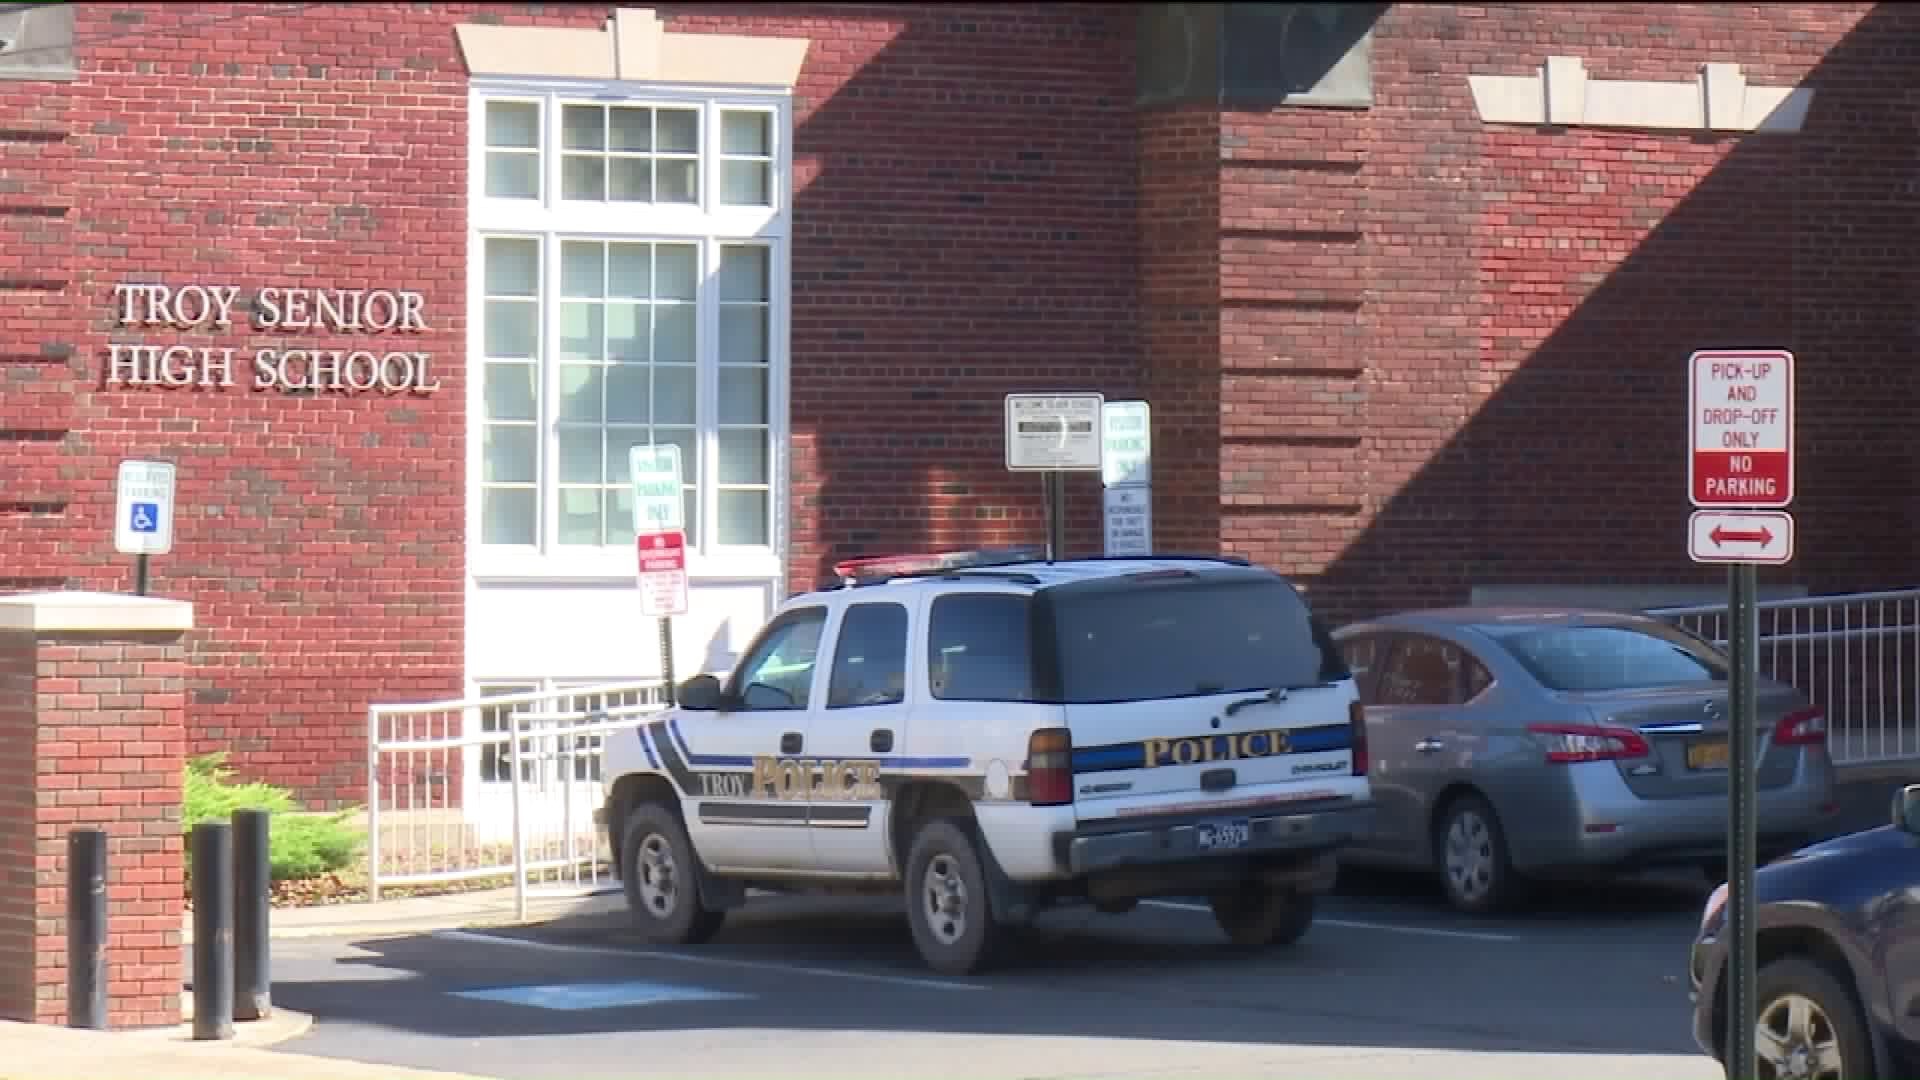 Threat To High School Causes Concern for Parents and Students